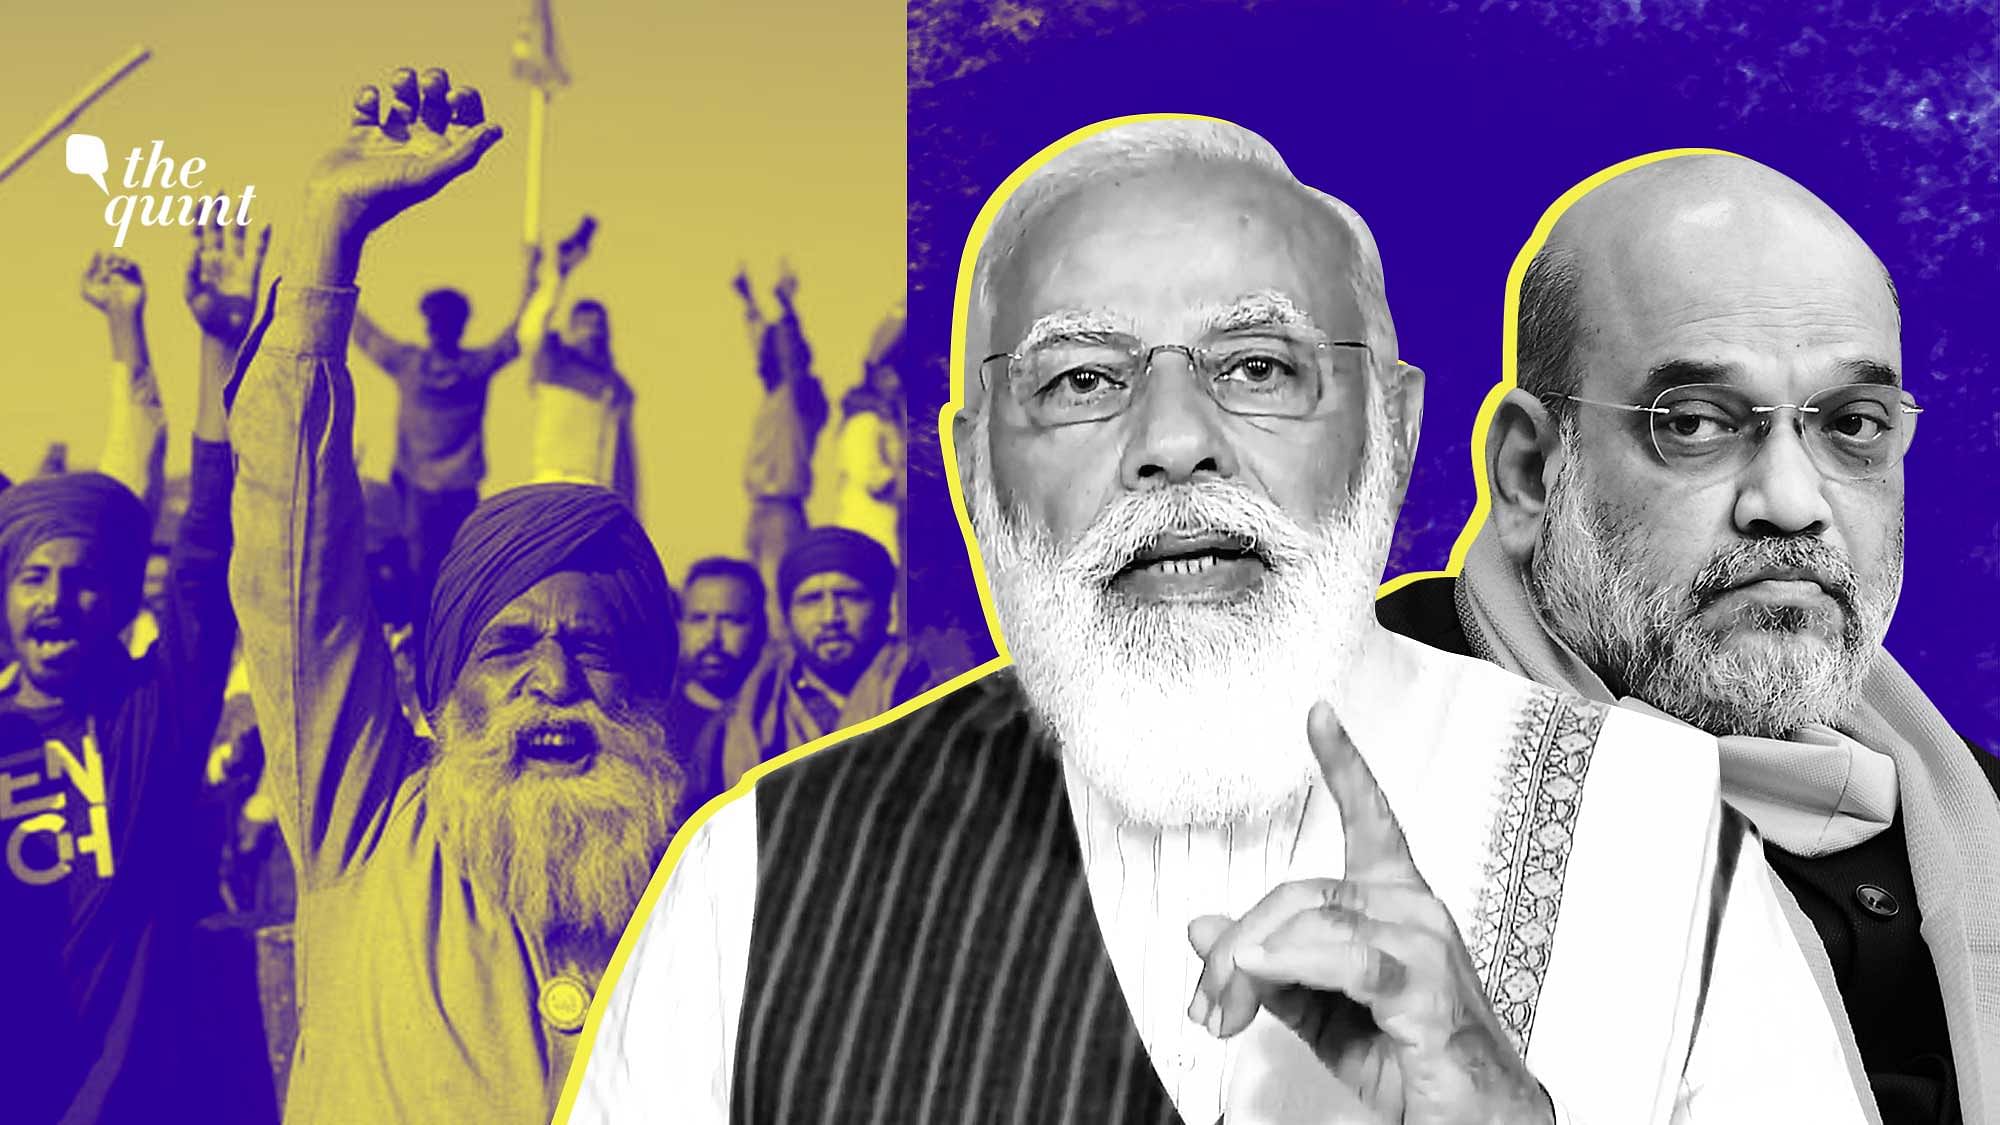 PM Narendra Modi and Amit Shah may have made wrong assumptions about farmers’ groups